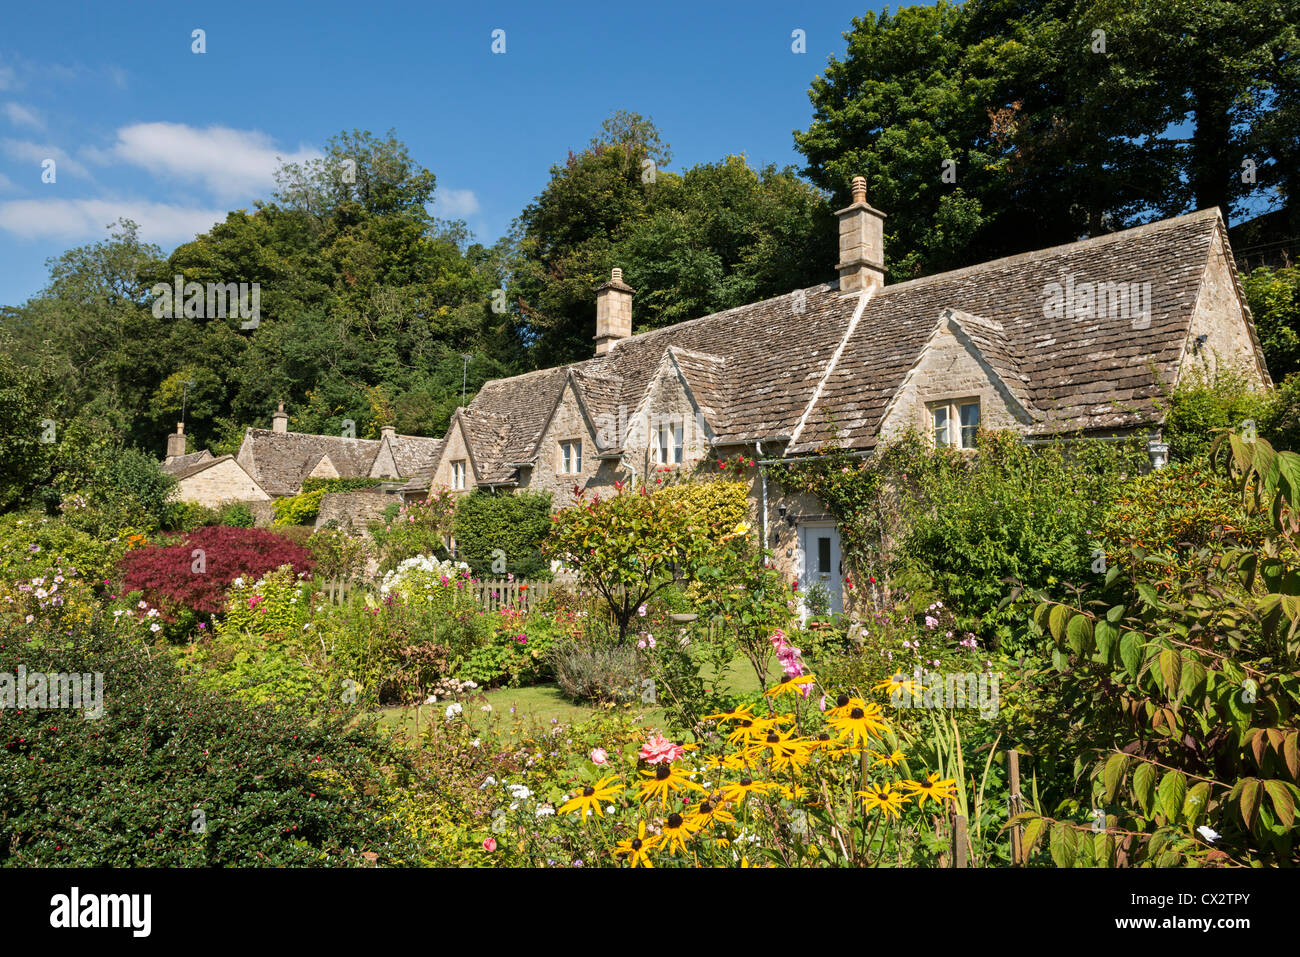 Pretty country cottages and gardens in the picturesque Cotswolds village of Bibury, Gloucestershire, England. Stock Photo